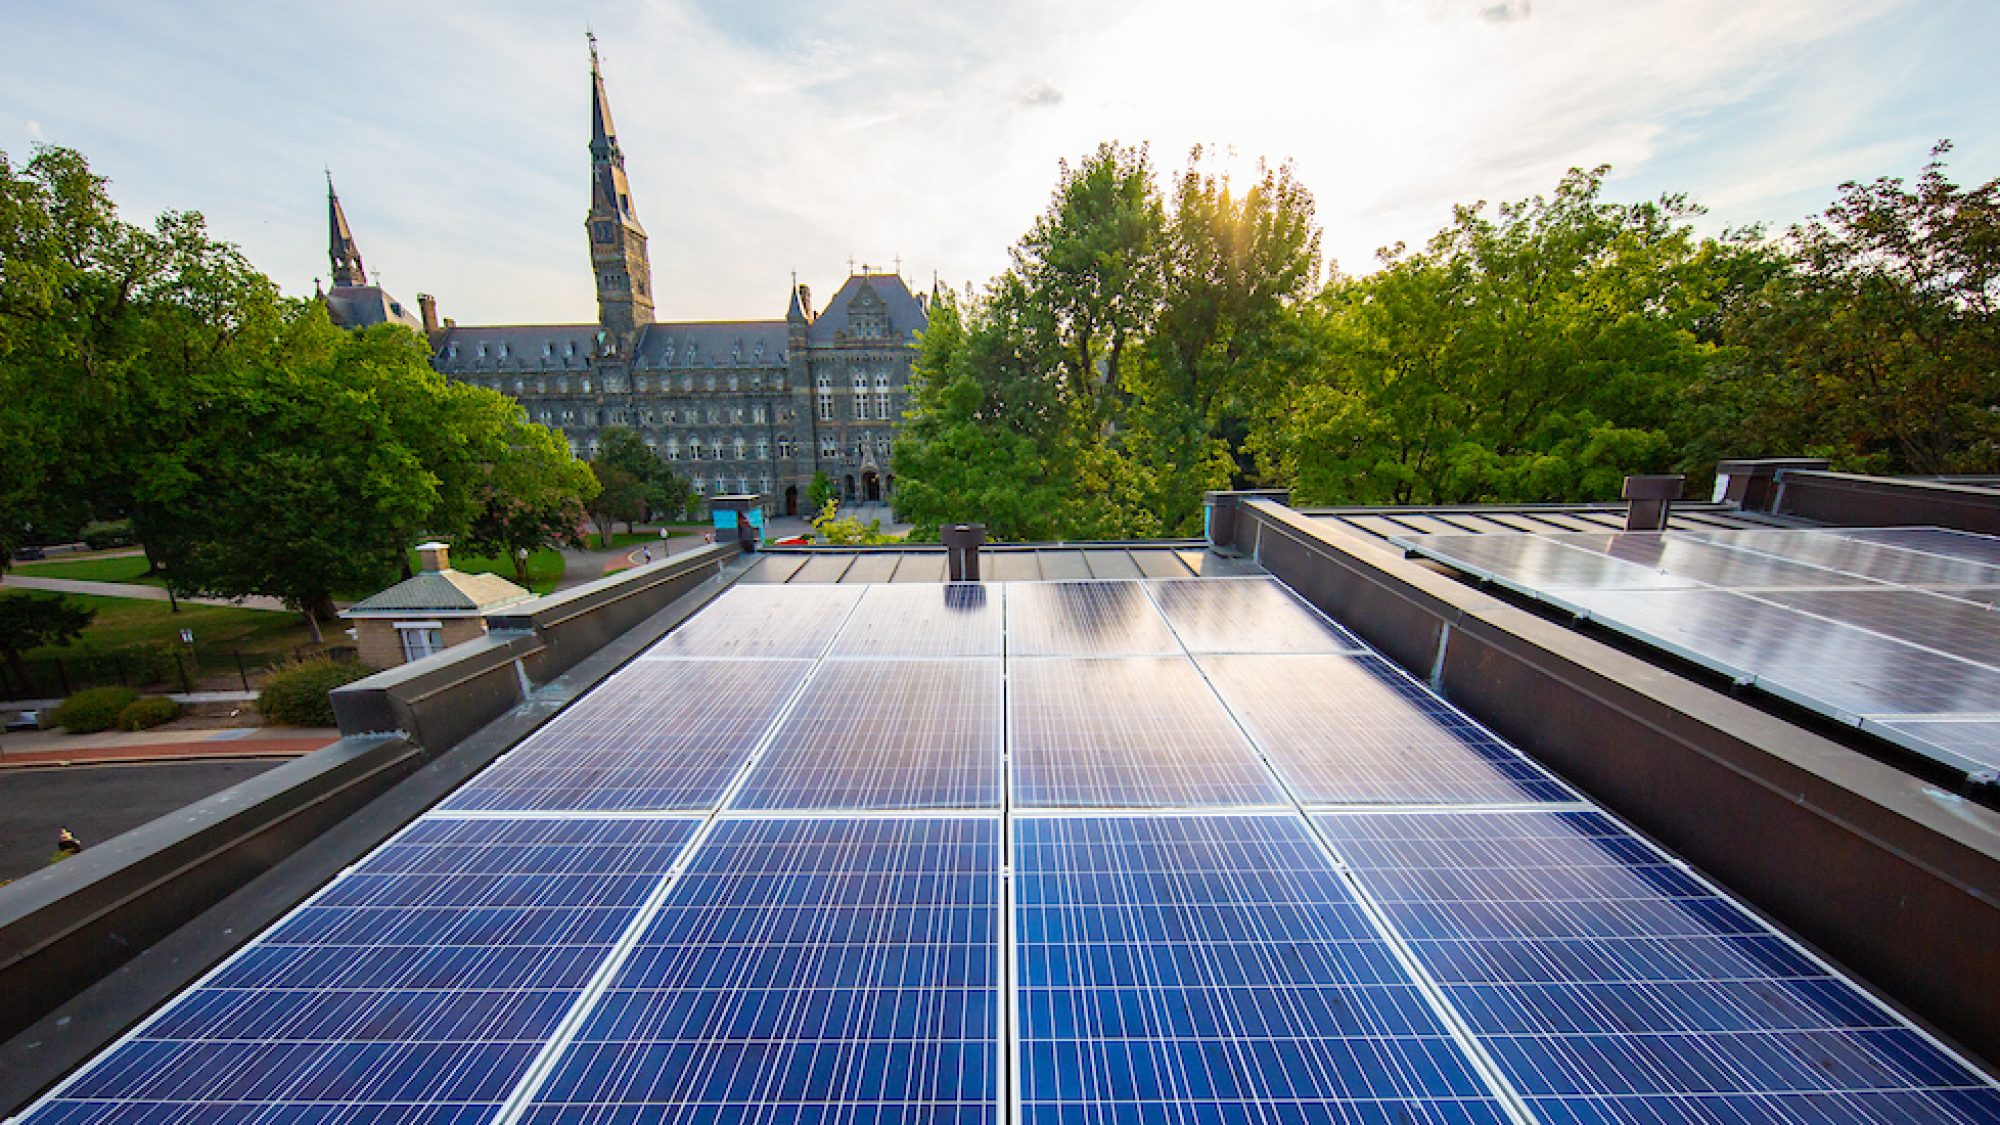 Solar panels on Georgetown townhouse rooftops with Healy Hall in the background